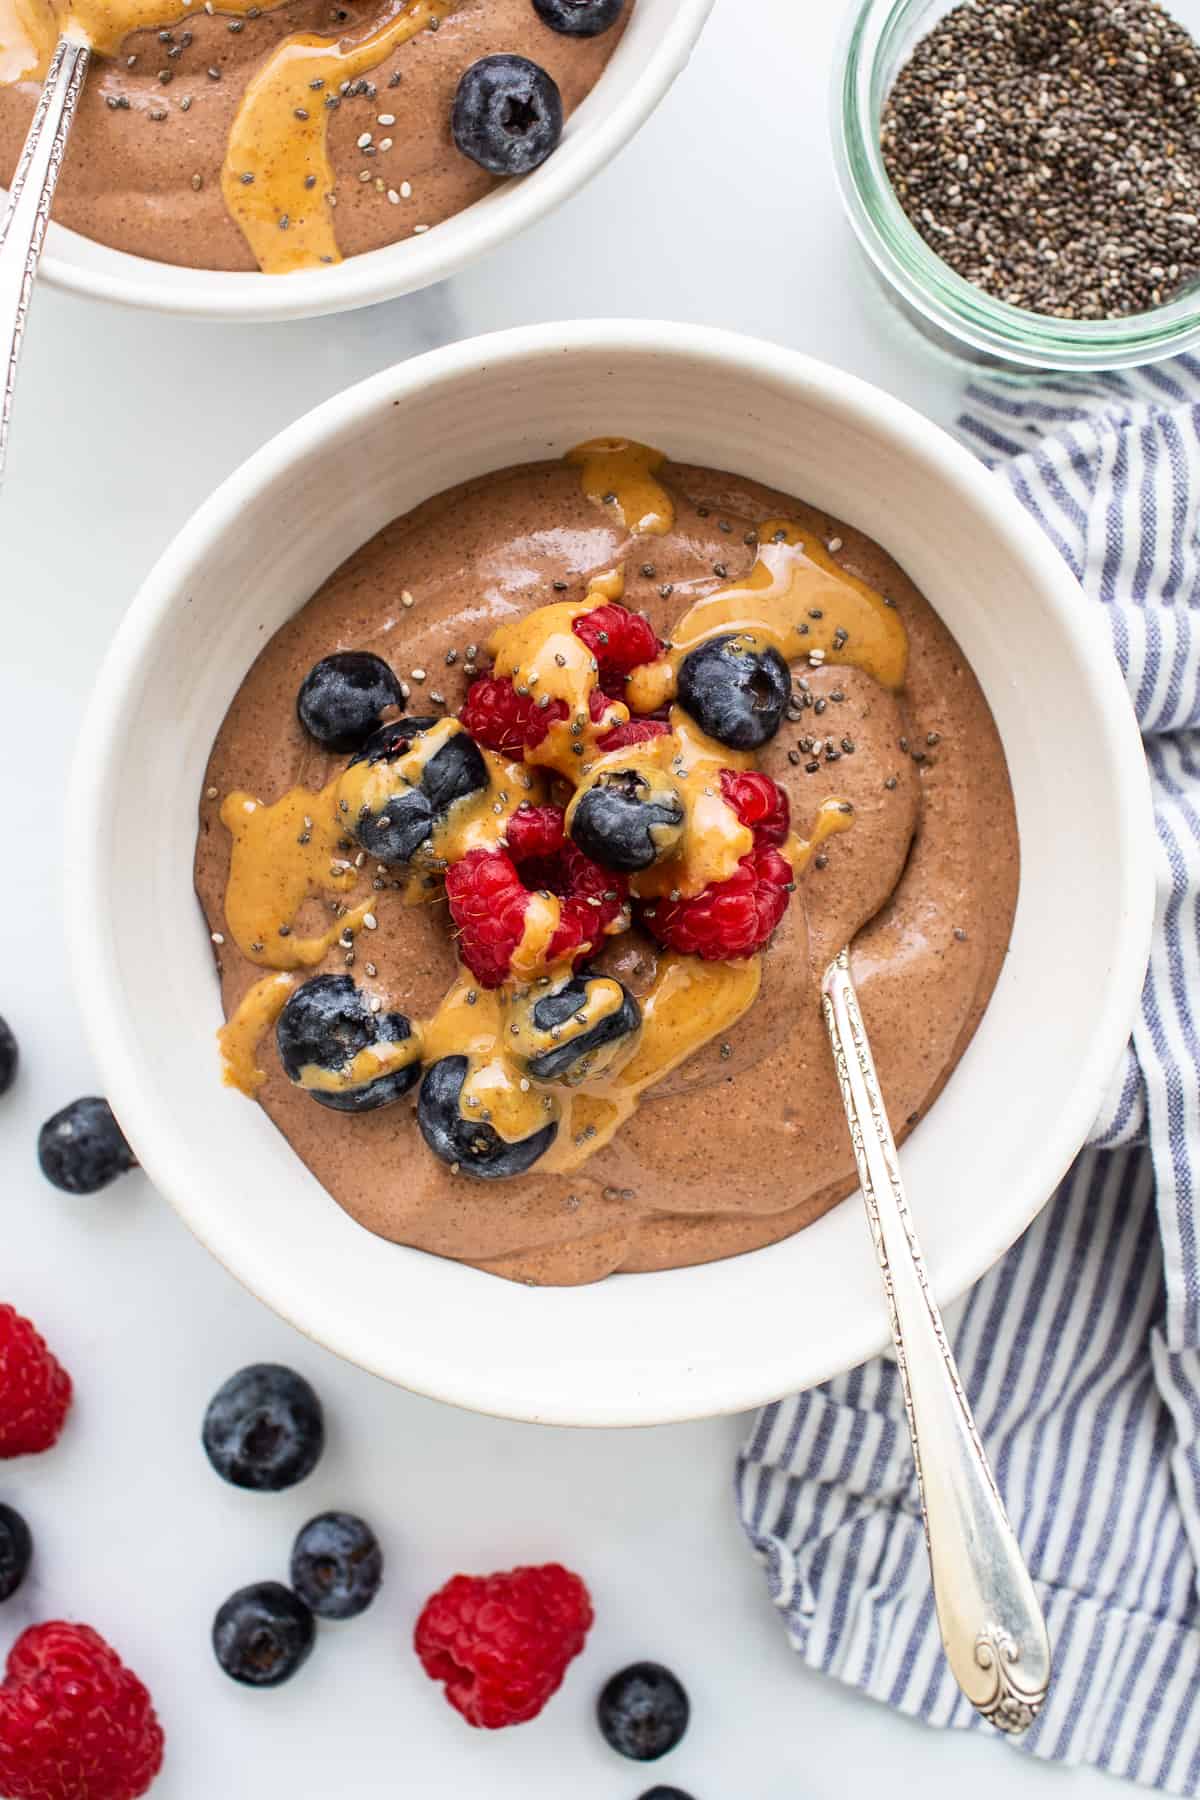 Blended chia seed pudding in a bowl topped with berries and peanut butter.